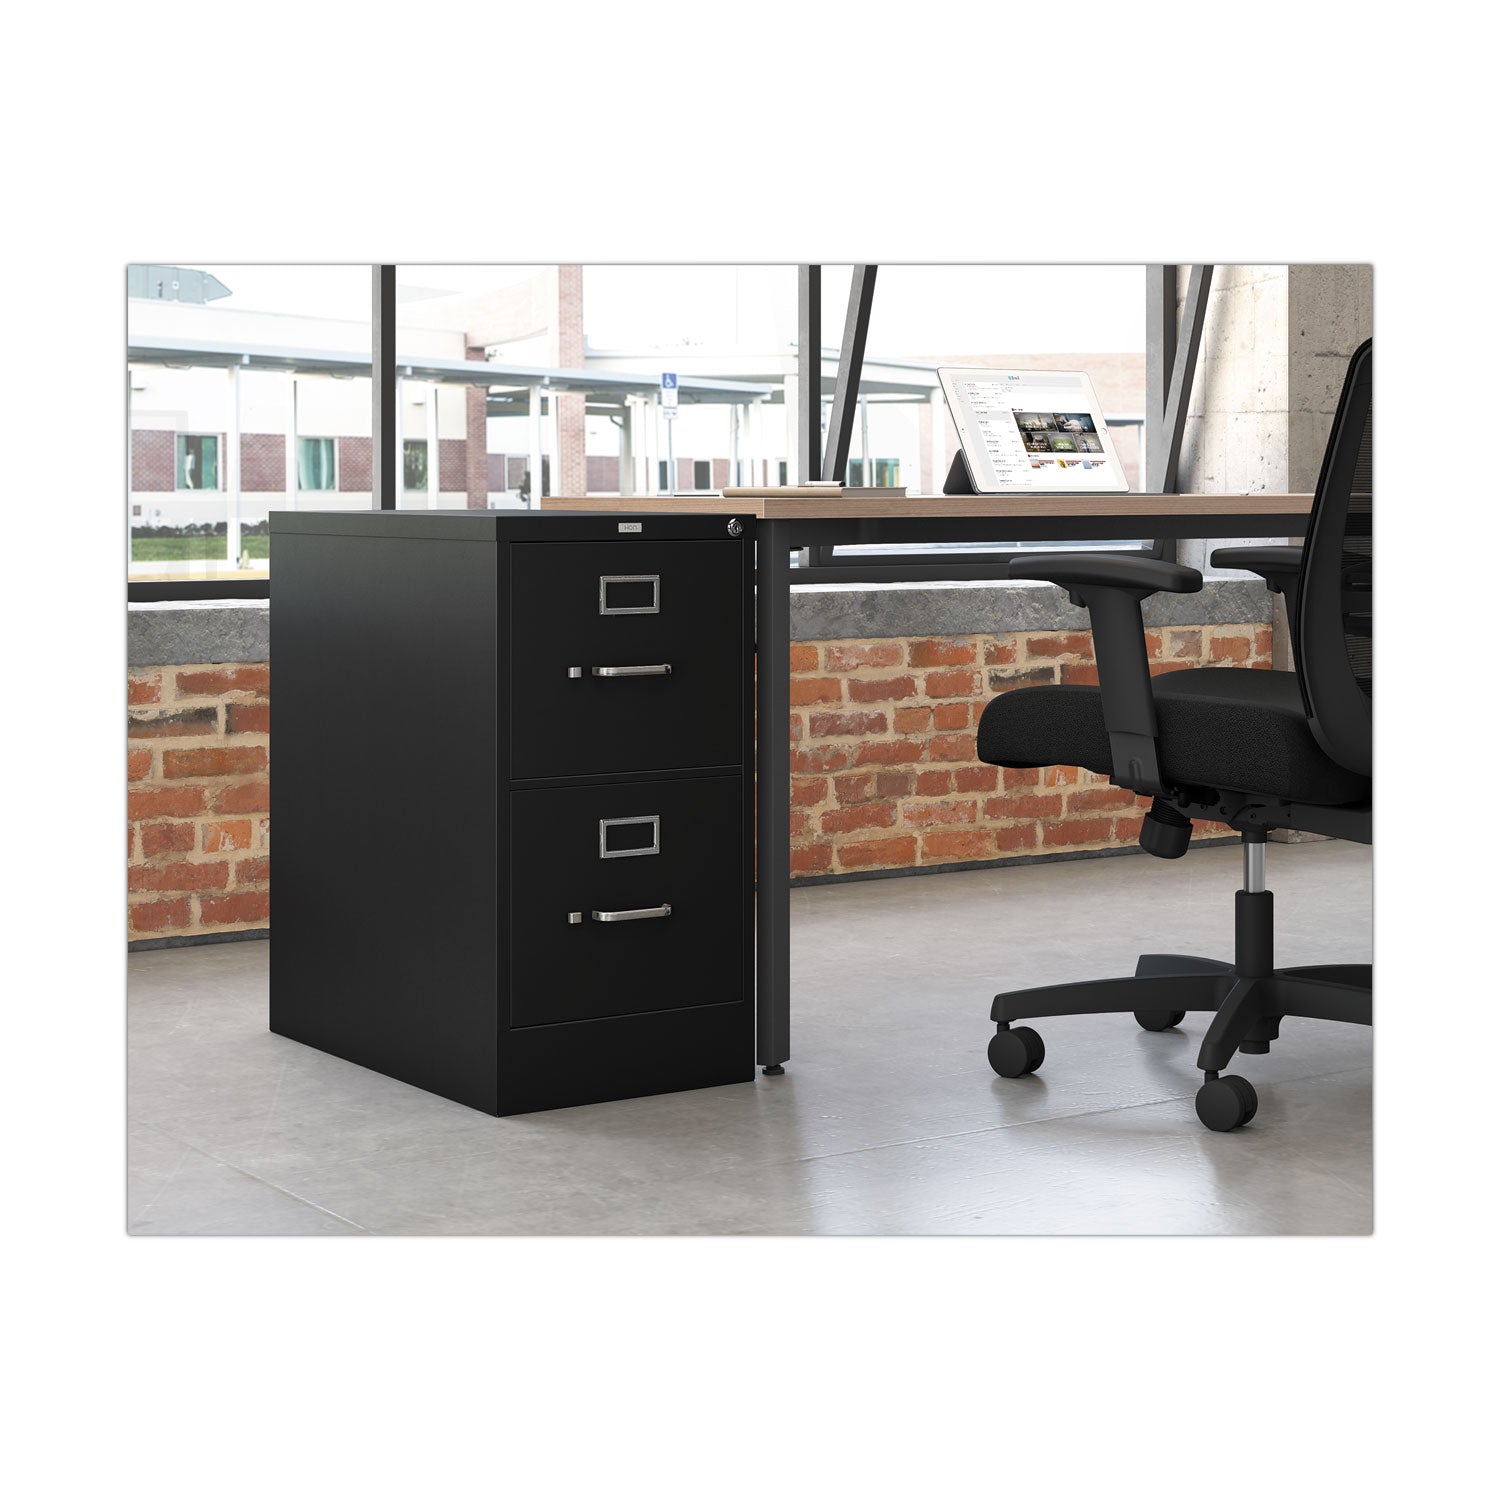 310 Series Vertical File, 2 Letter-Size File Drawers, Black, 15" x 26.5" x 29 - 